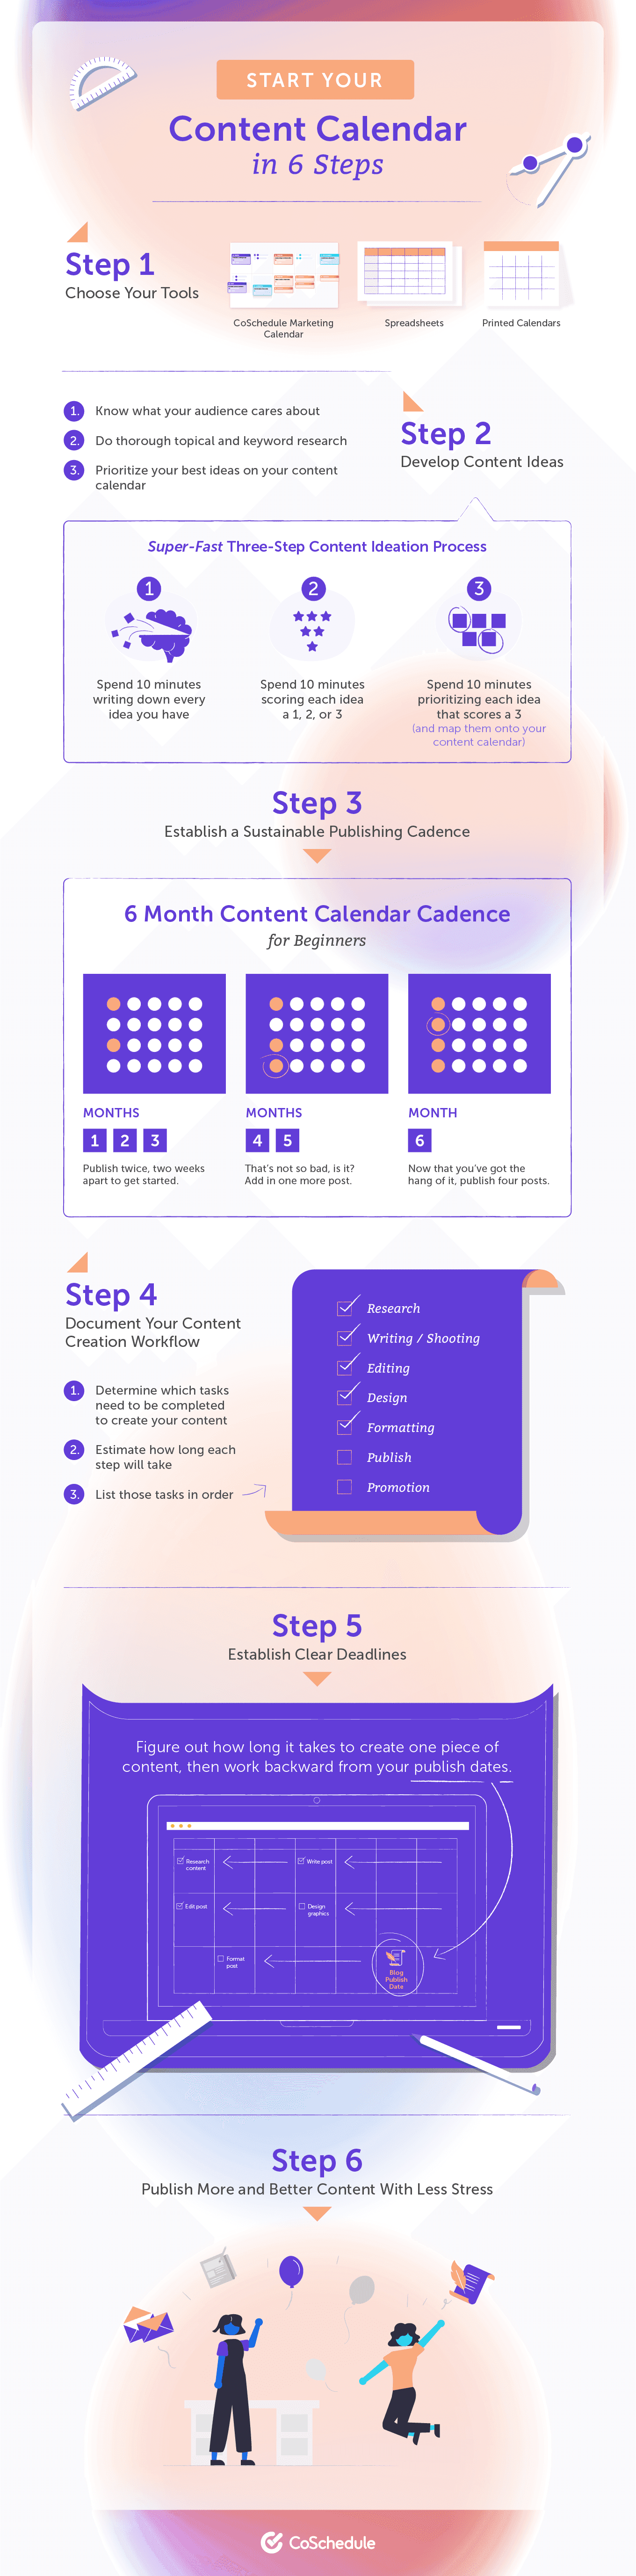 Start your content calendar infographic from CoSchedule